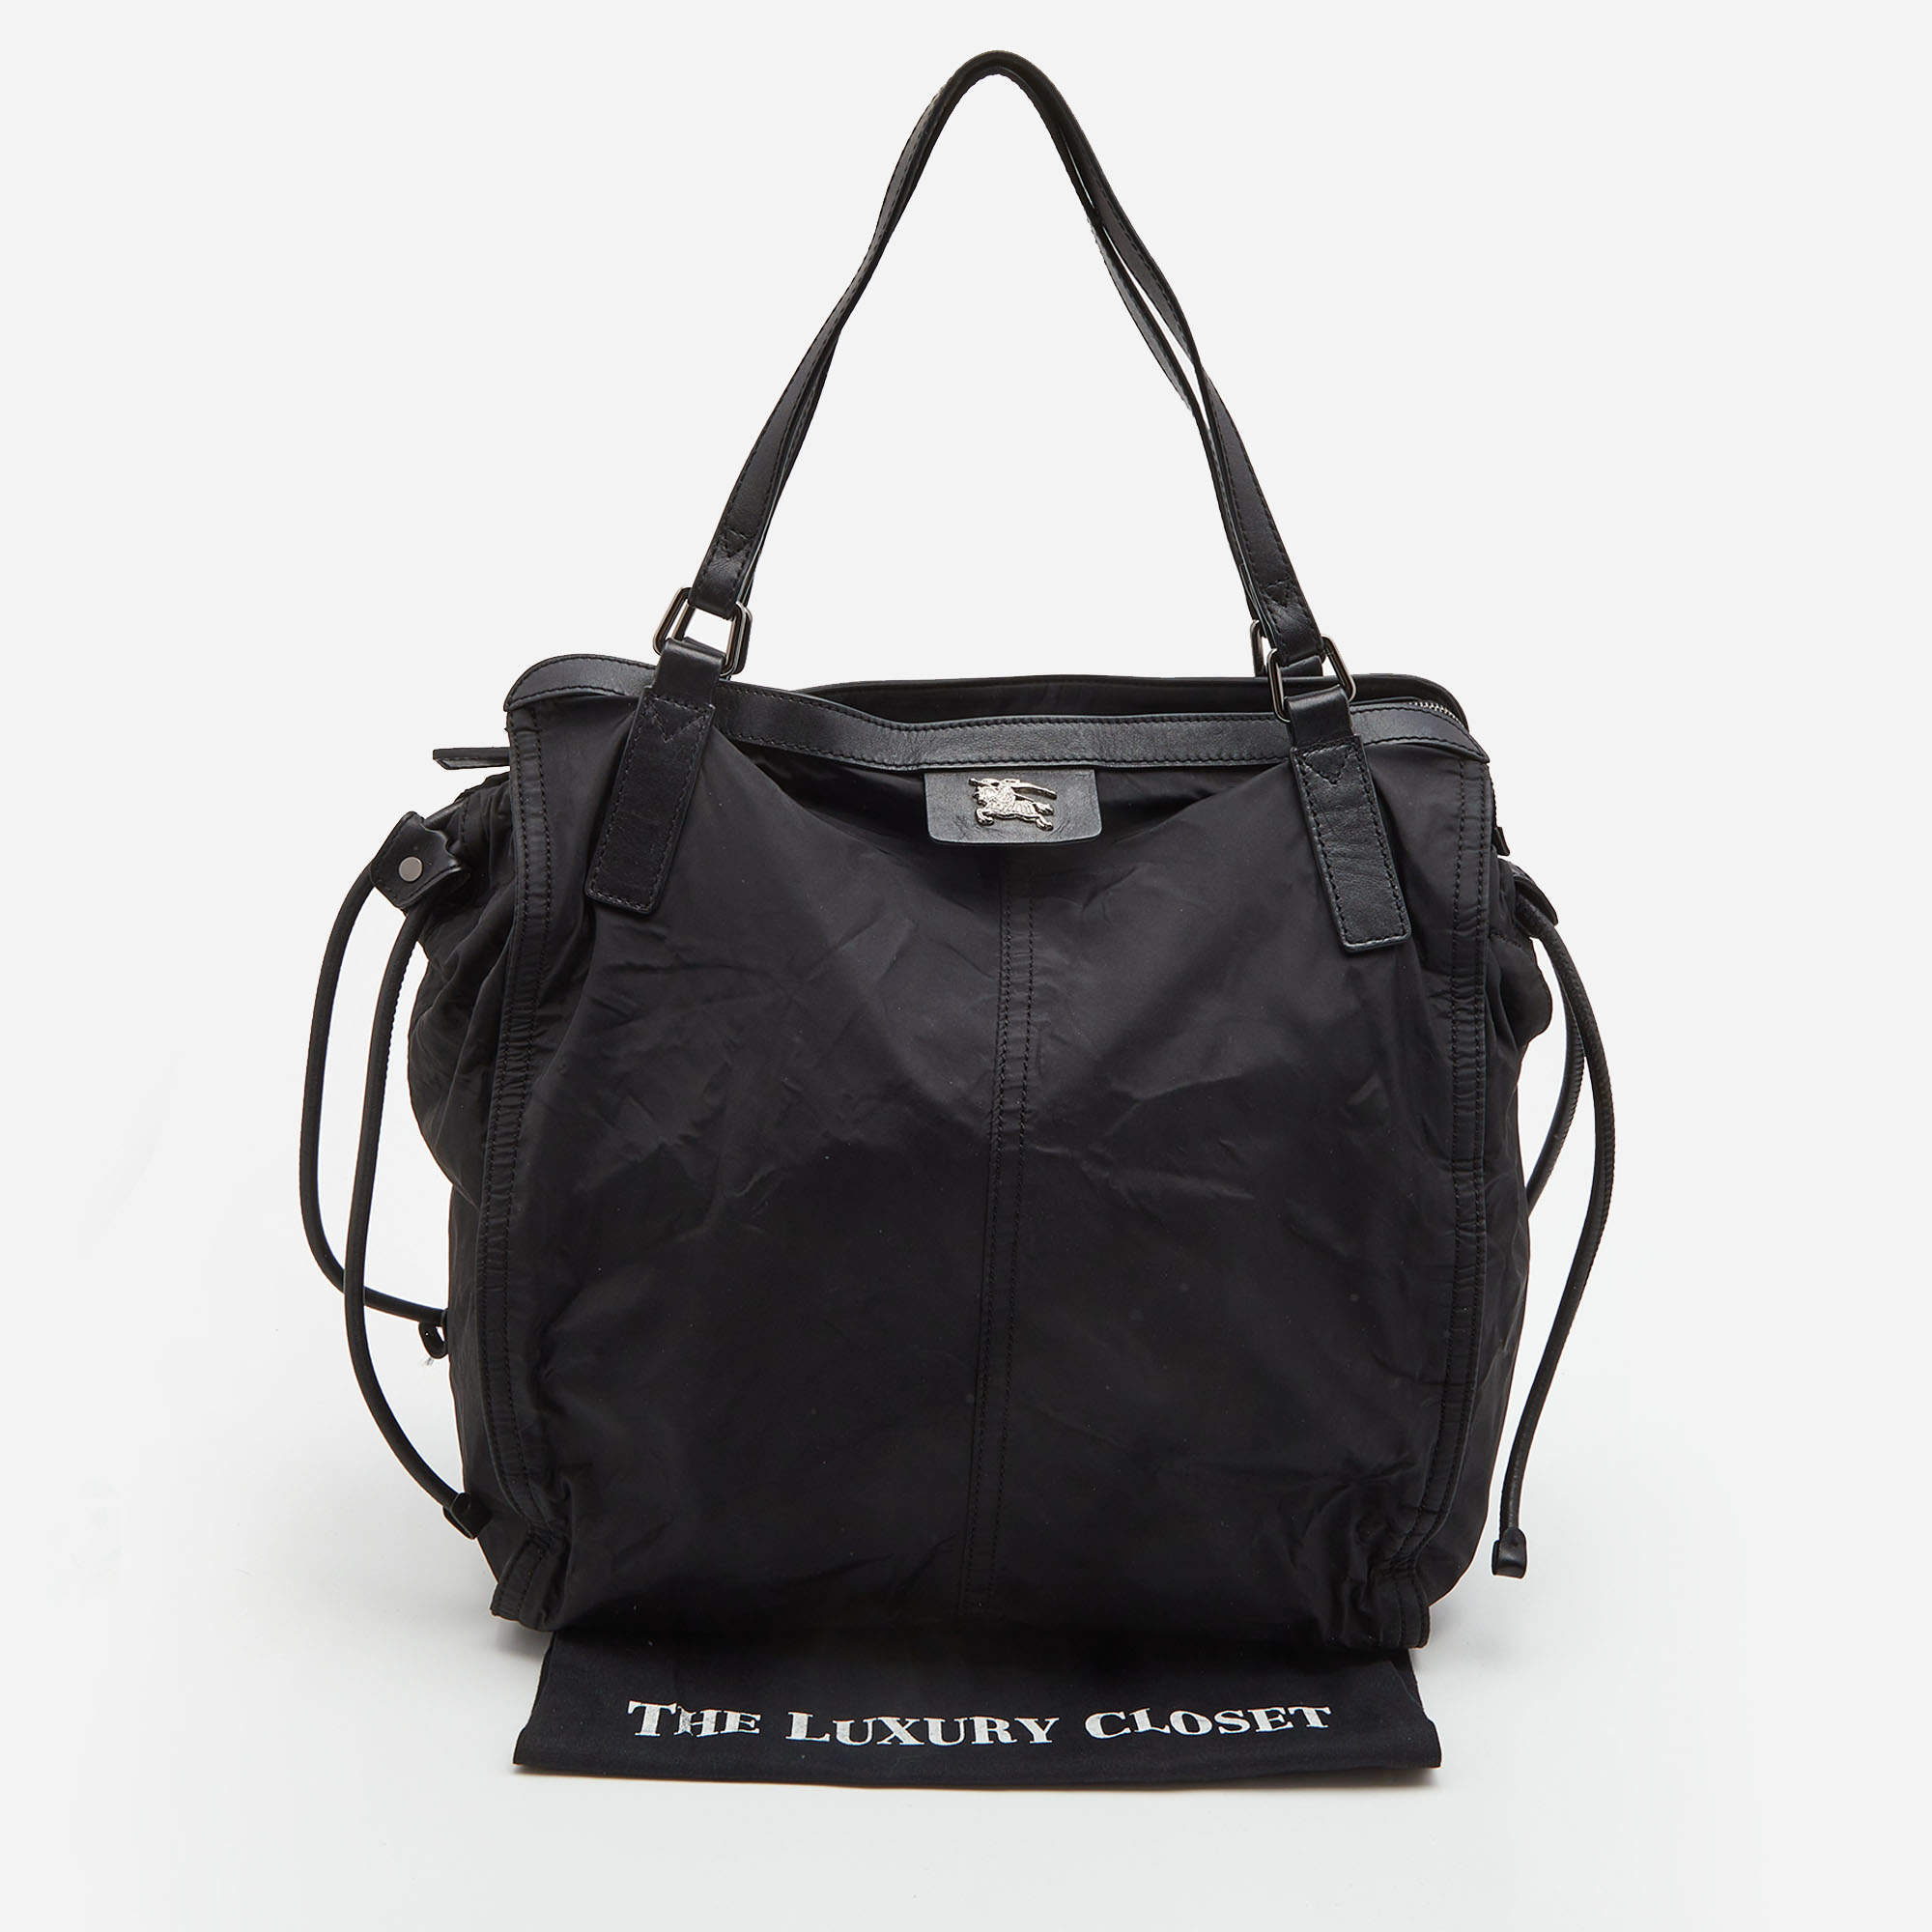 Burberry Black Nylon Leather Buckleigh Tote Bag